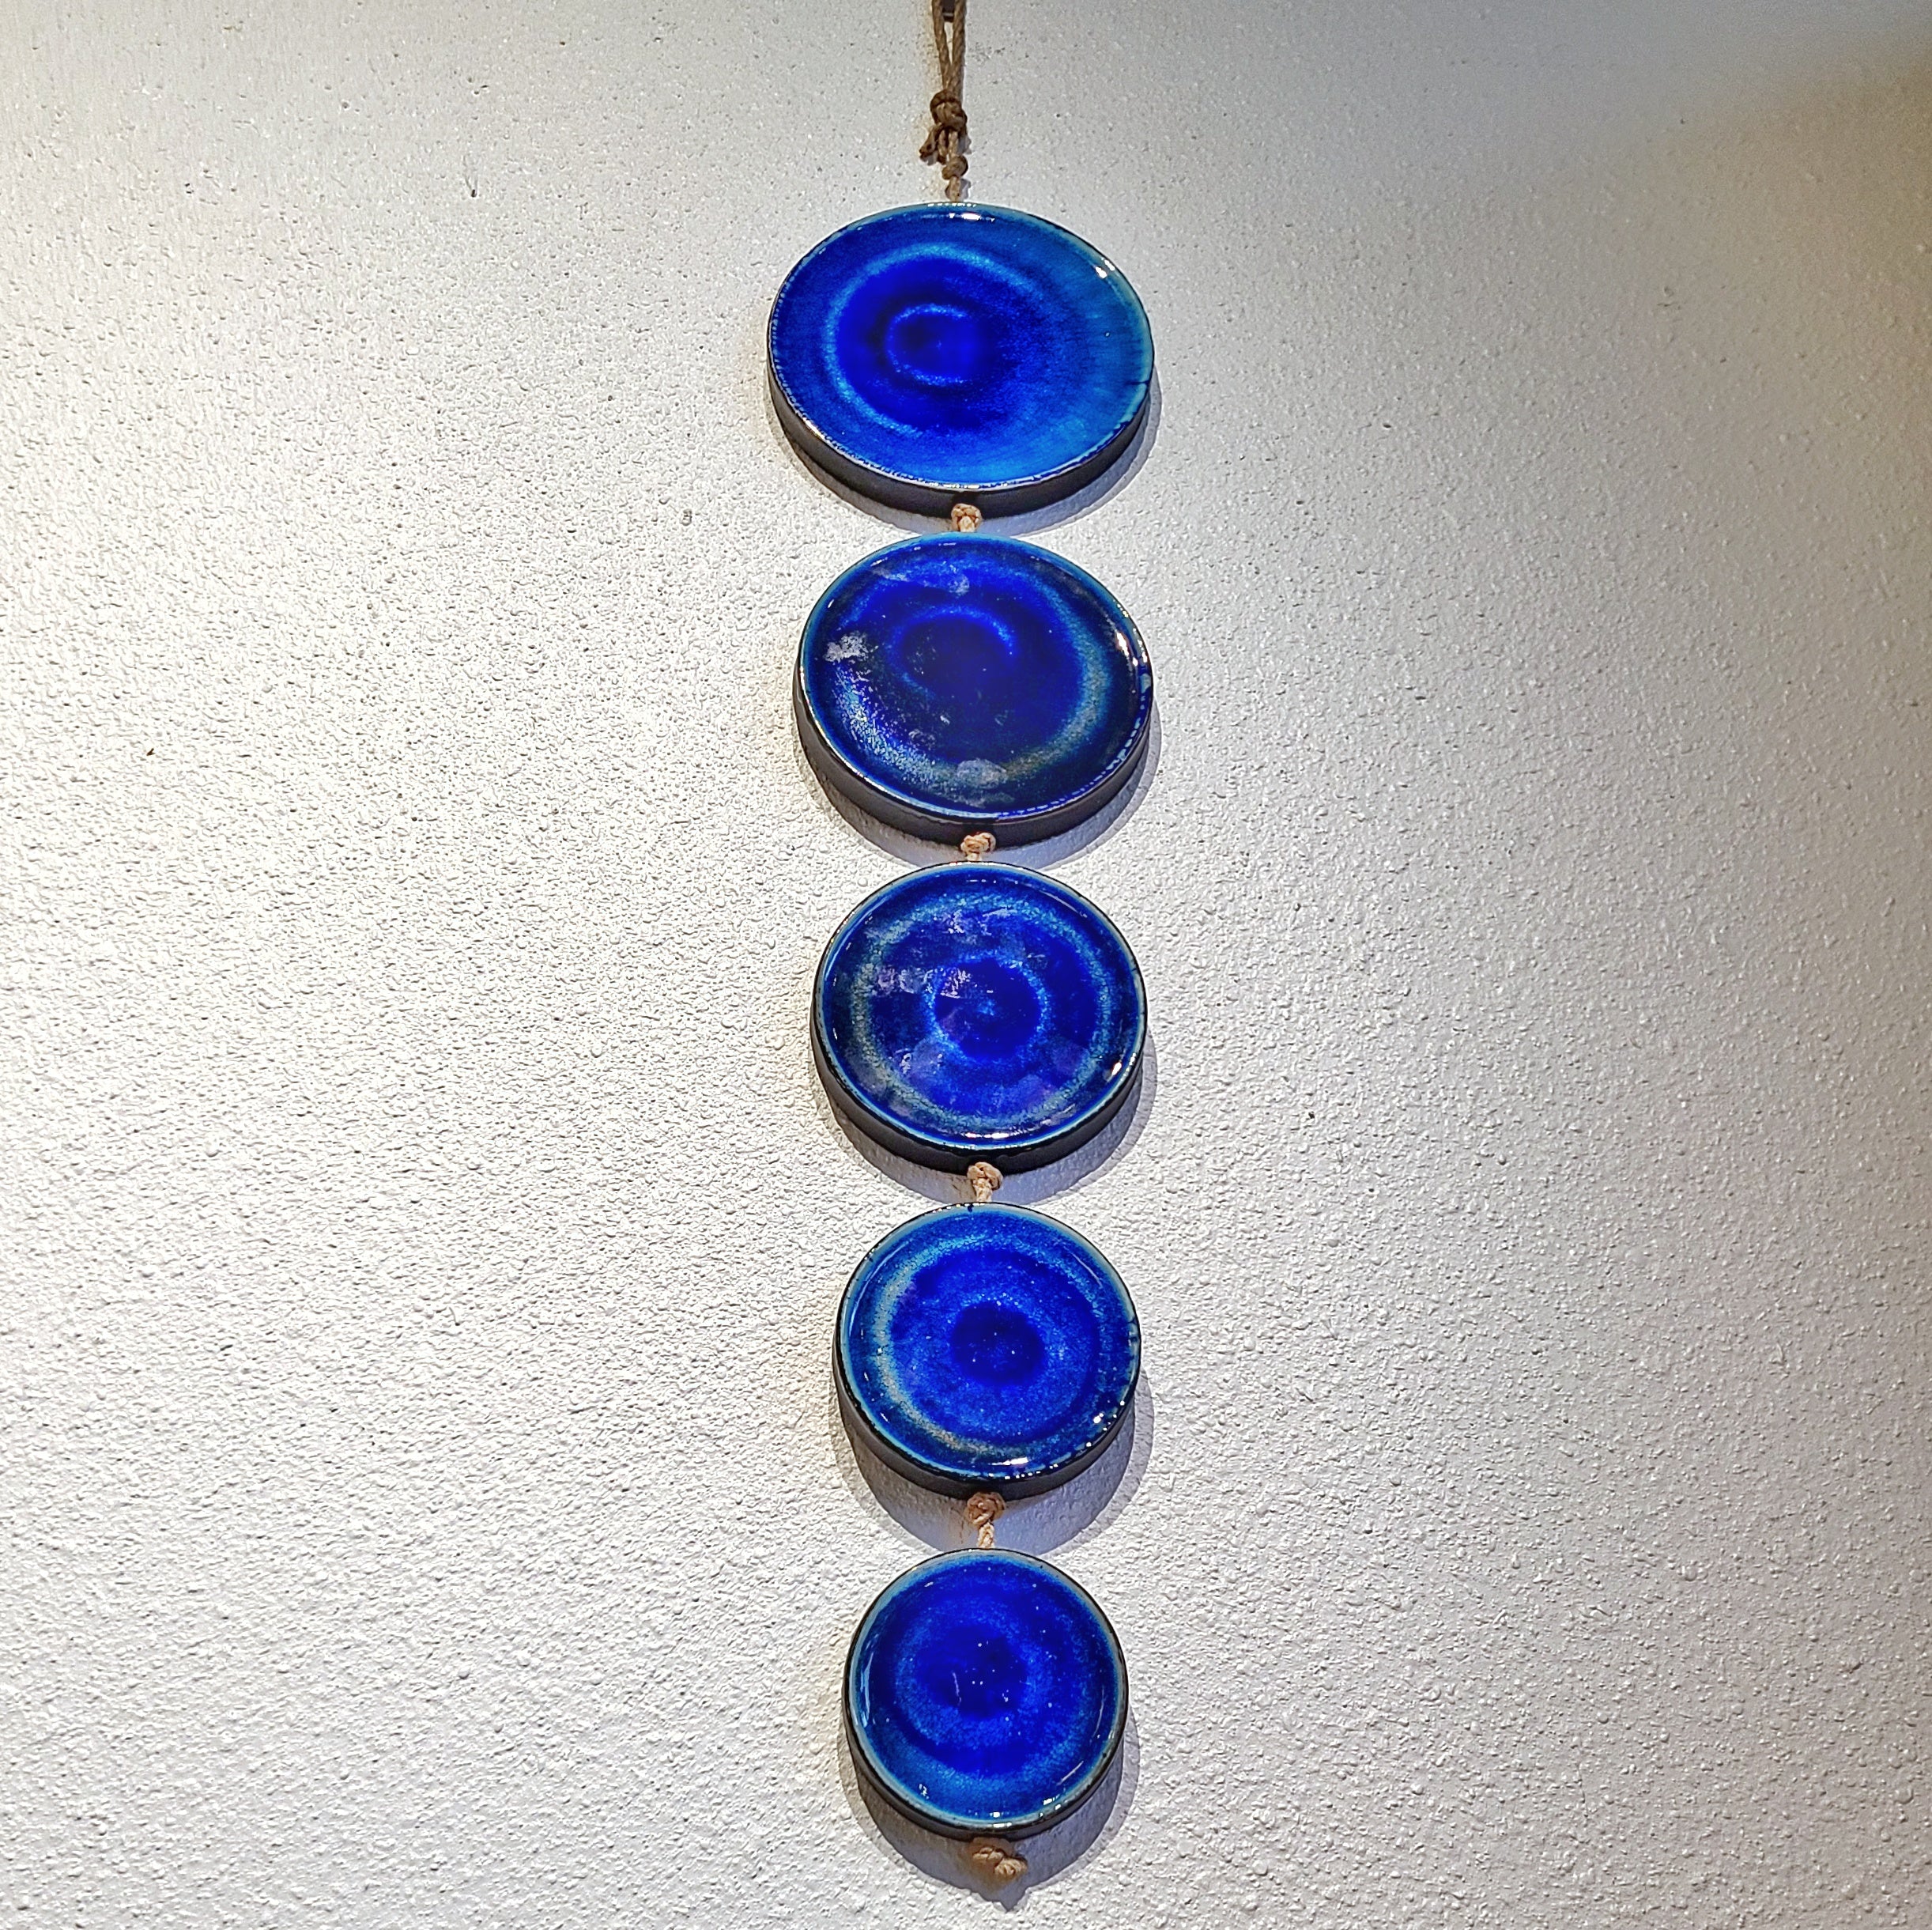 ‘AZZURRO’ DÉCOR FIVE-DISK WALL HANGING BY HANNS WELLING FOR CERAMANO